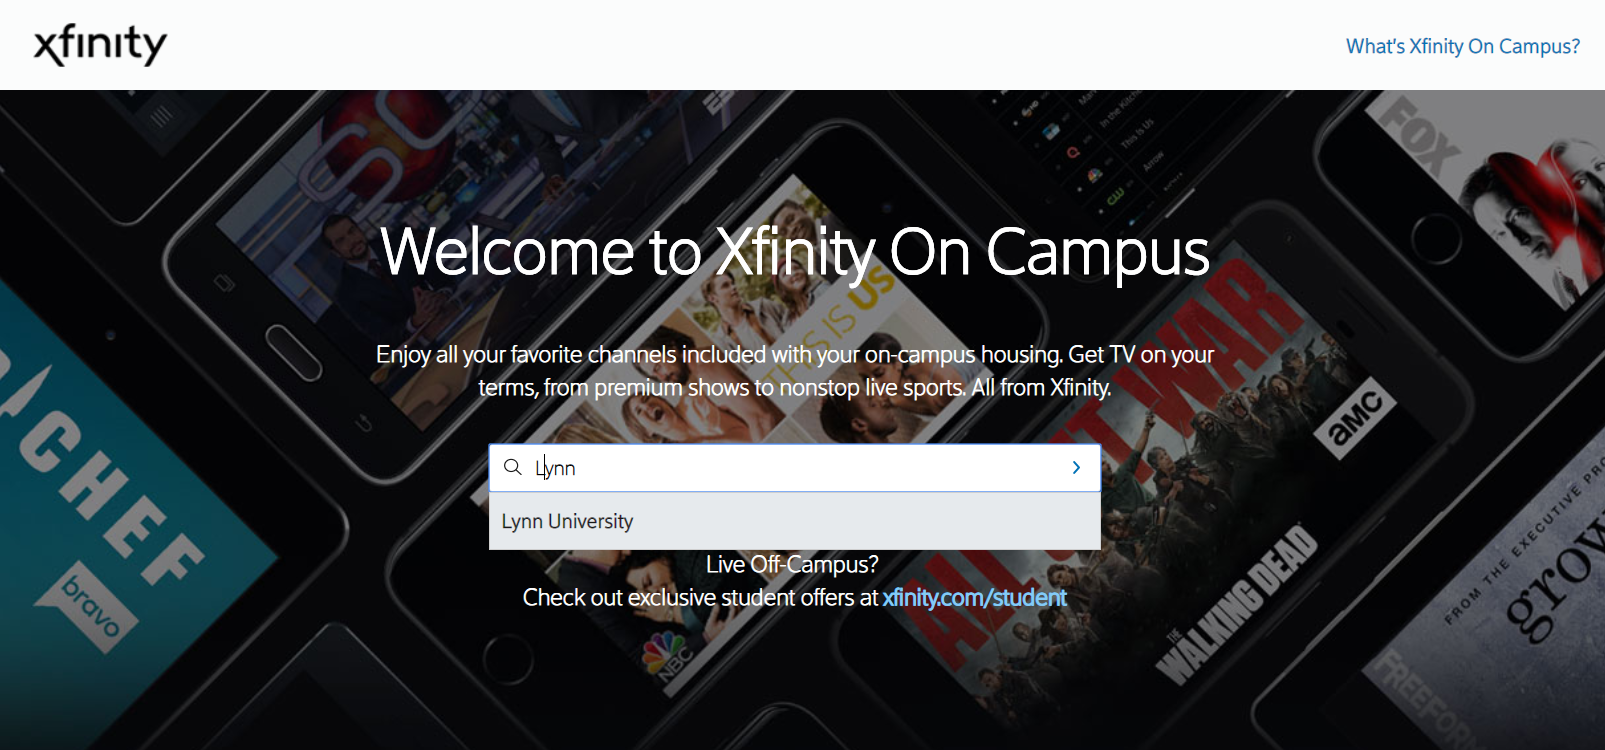 Xfinity institution search page